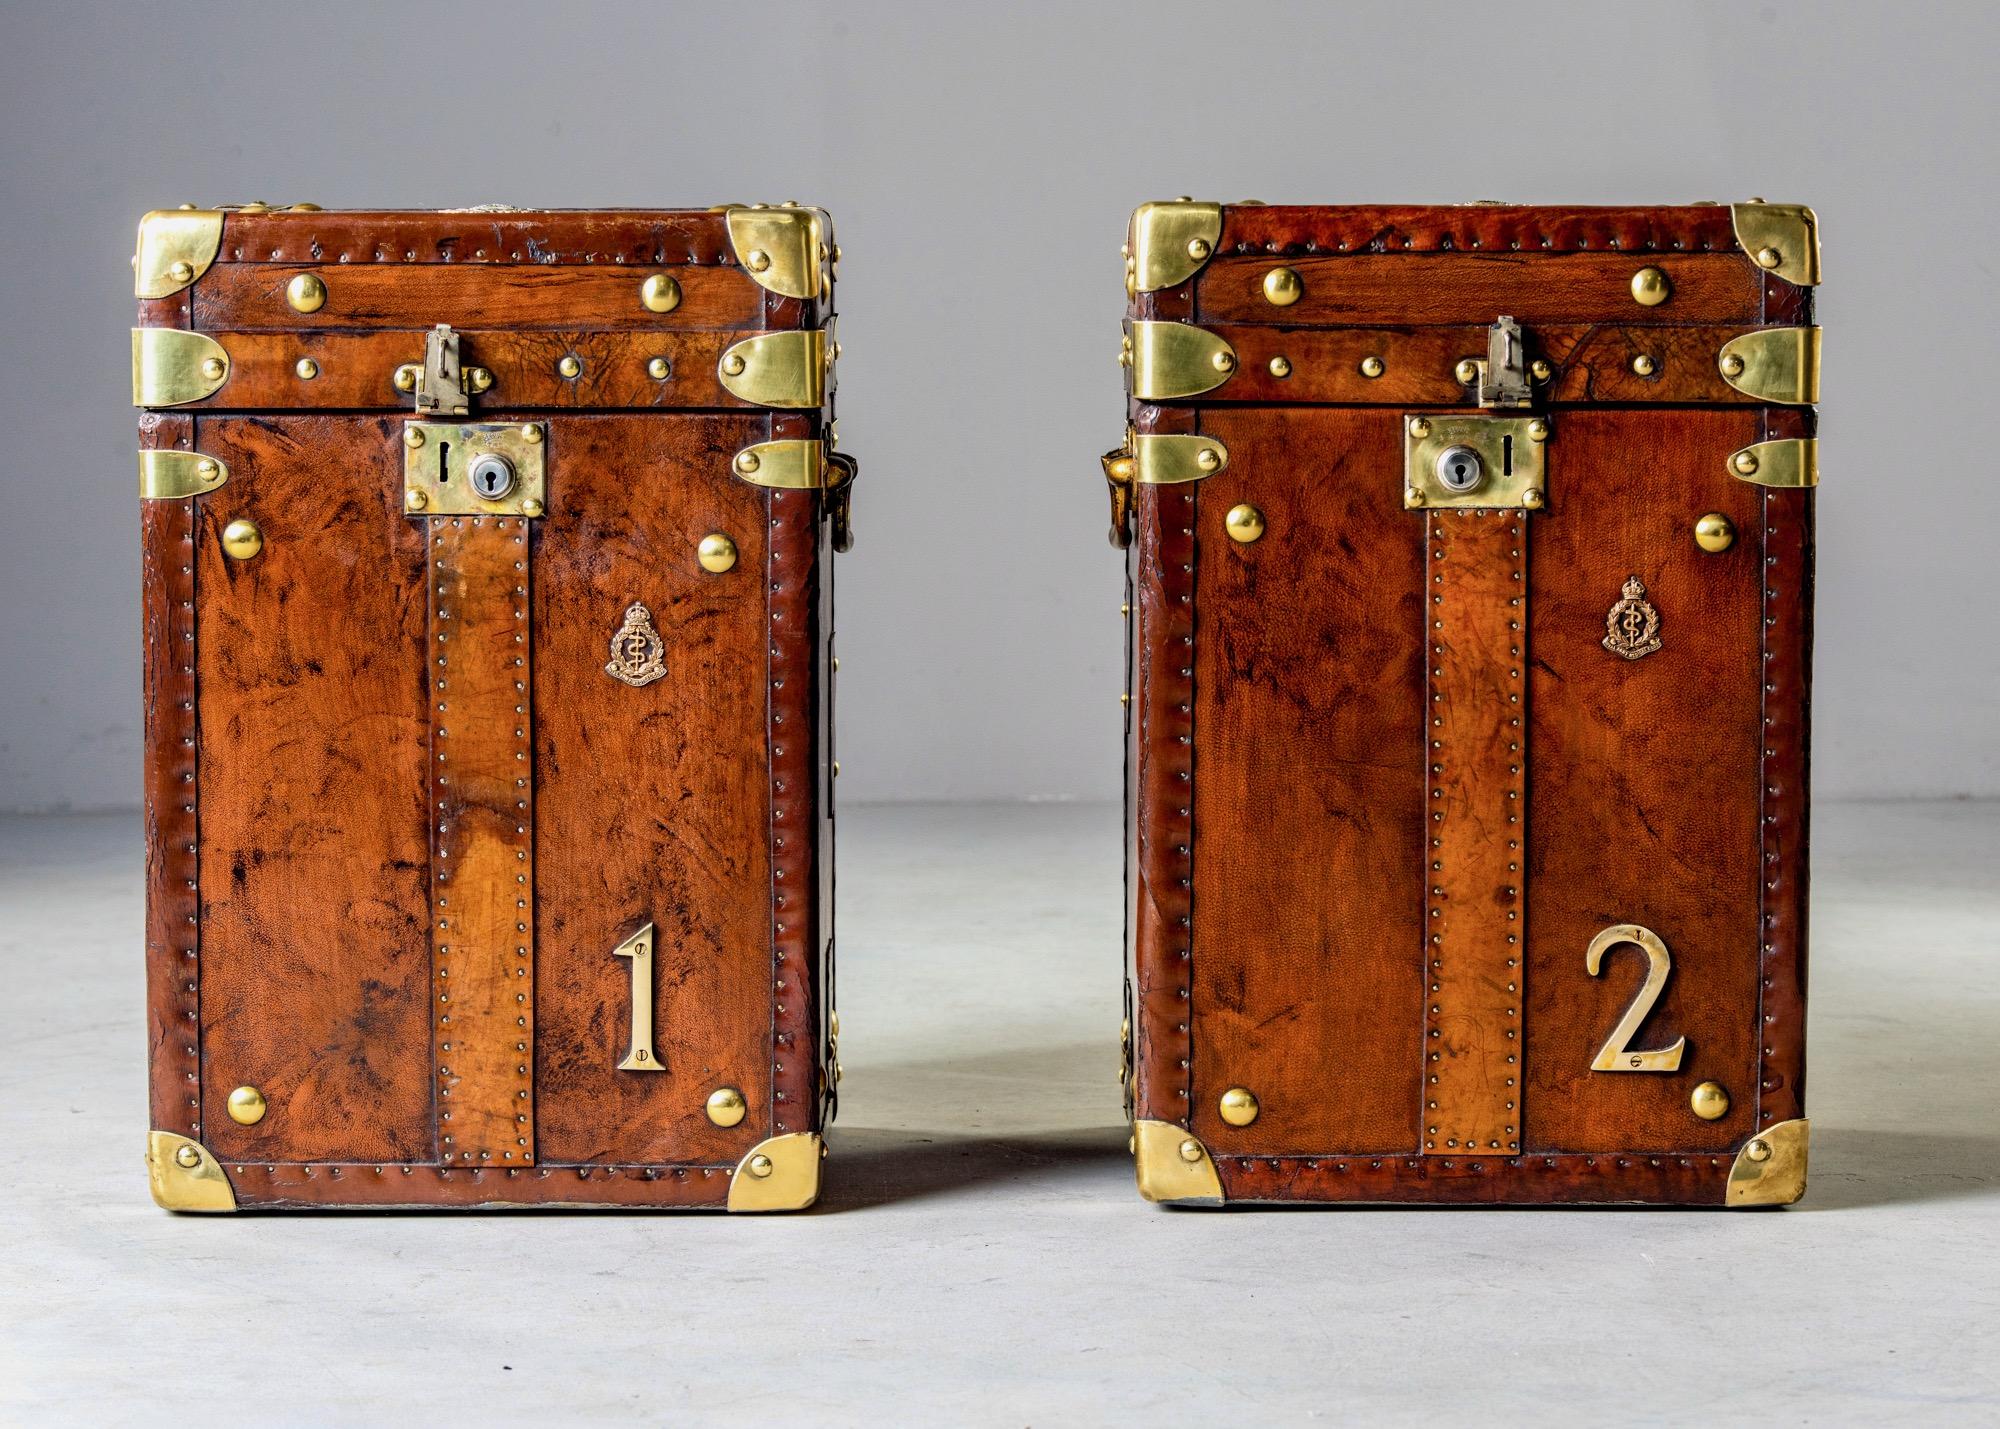 Found in England, this pair of circa 1900s pair of leather and brass trunks have been professionally restored, early 20th century. Leather has been reconditioned and patched where needed. Interiors have been recovered in a royal blue velour and the